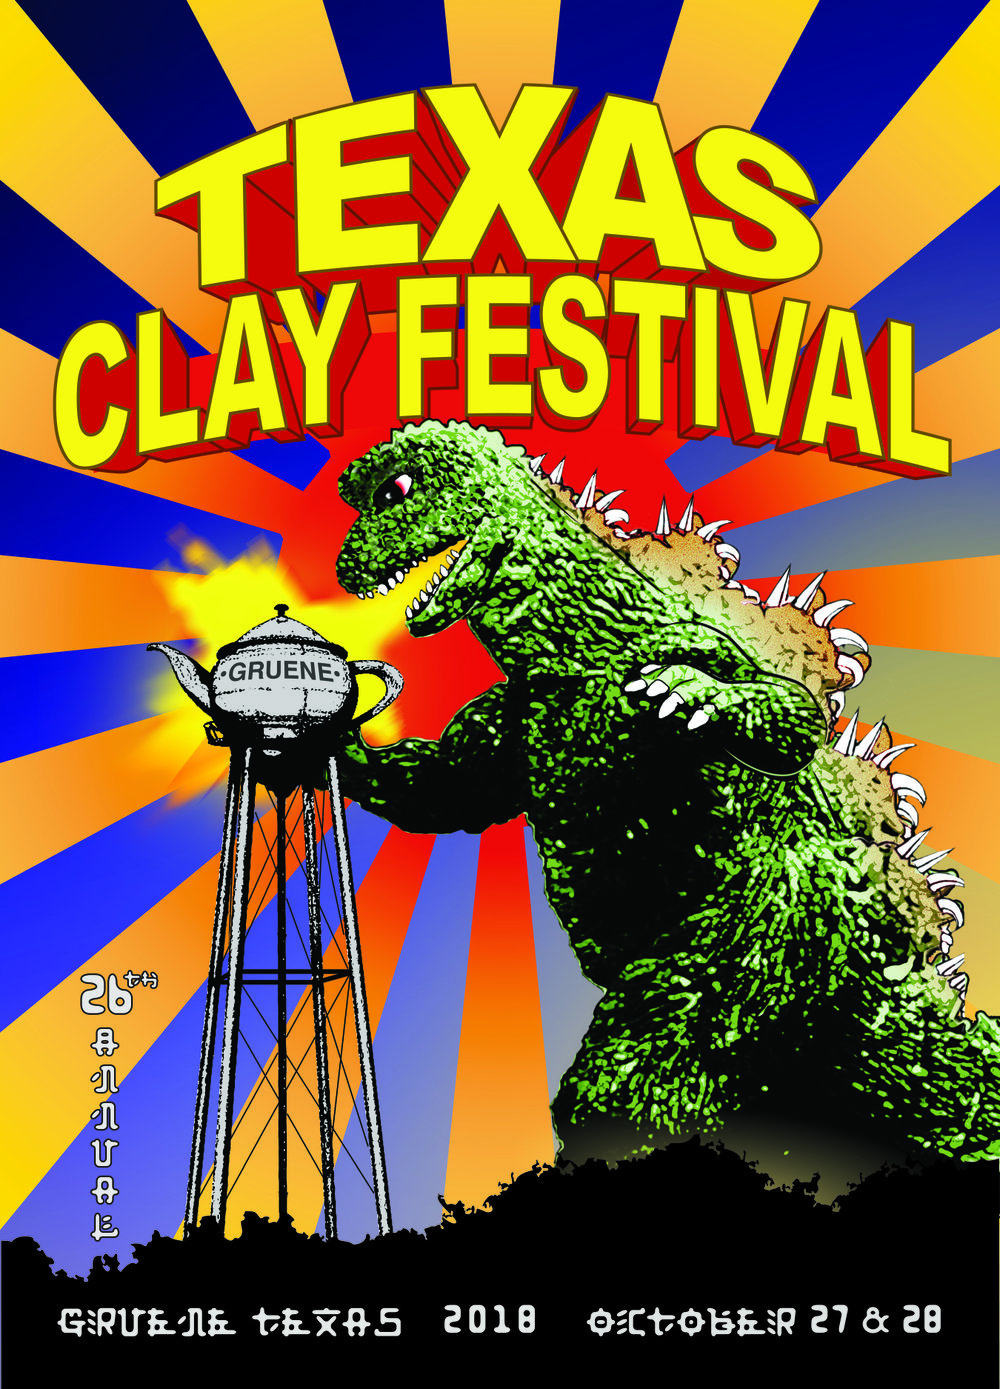 GRAPHIC: Poster featuring a Godzilla aesthetic for the 2018 Texas Clay Festival. Though most of their posters have been made by TCF, in 1993, the inaugural year, Max Bulter created the image. Graphic courtesy of Texas Clay Festival.